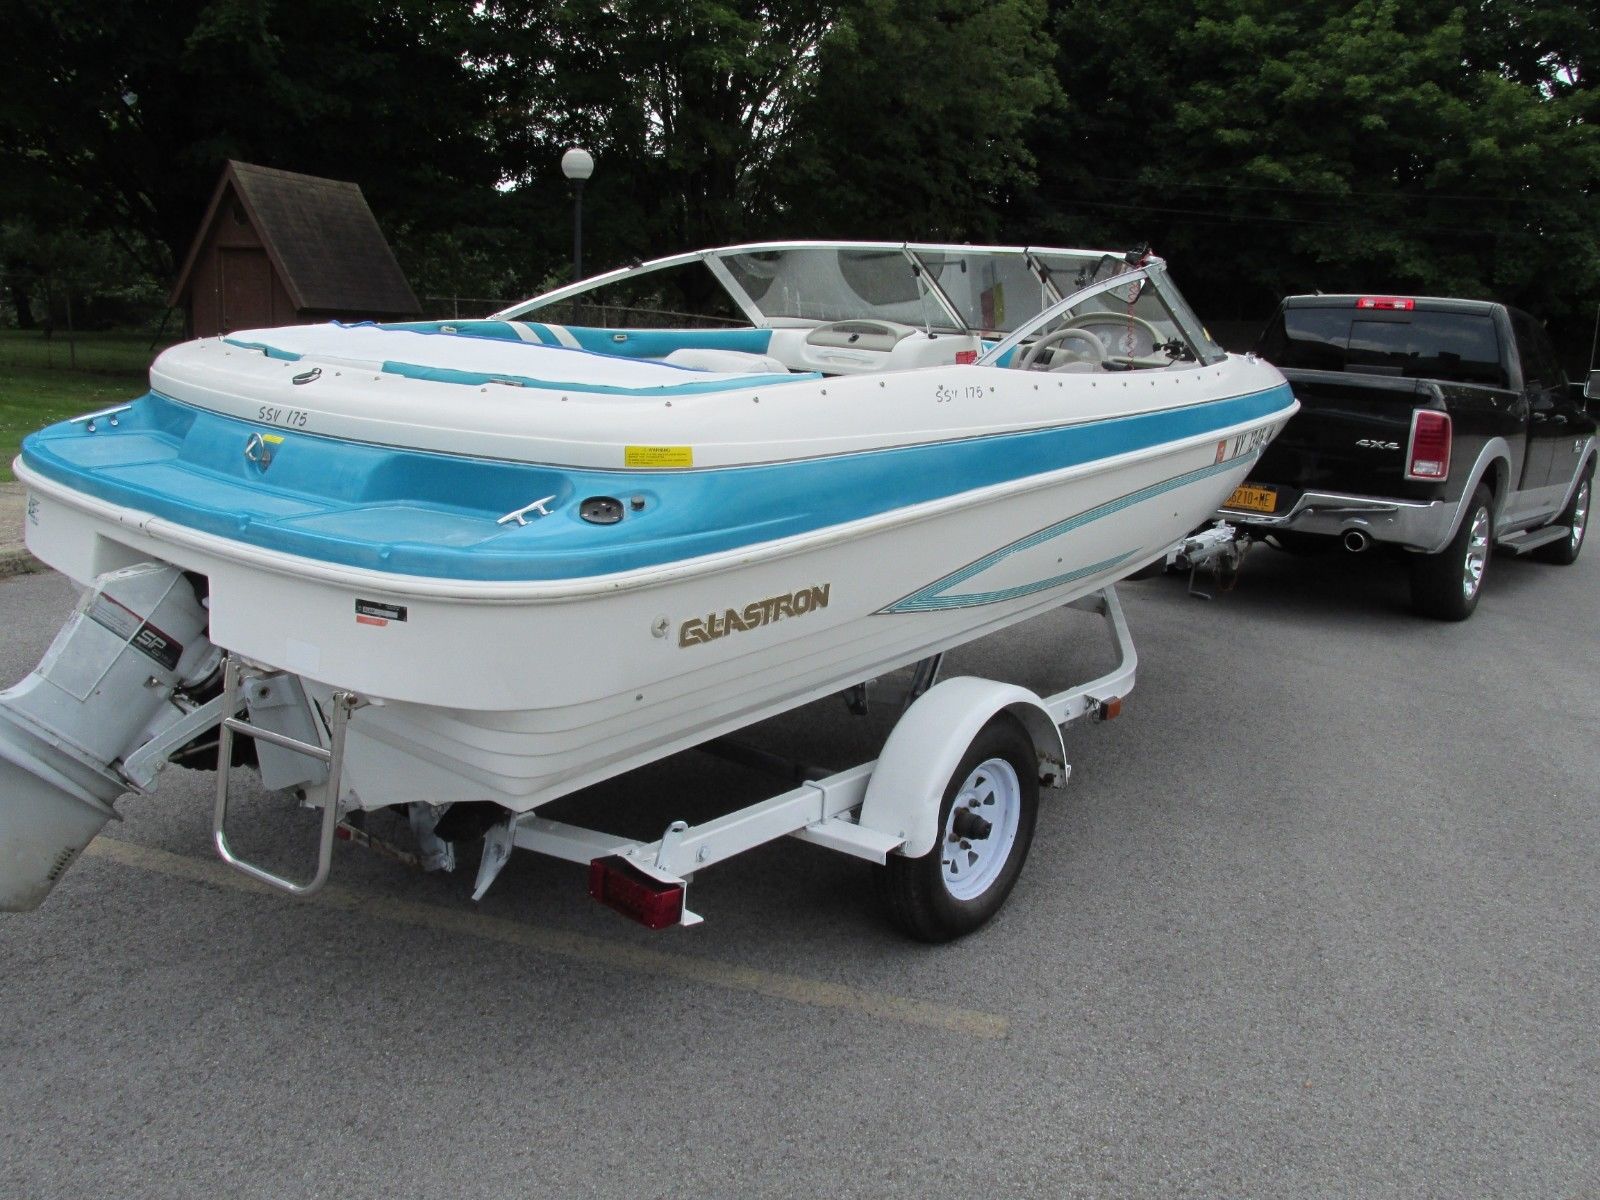 Glastron SSV 175 1994 for sale for $860 - Boats-from-USA.com